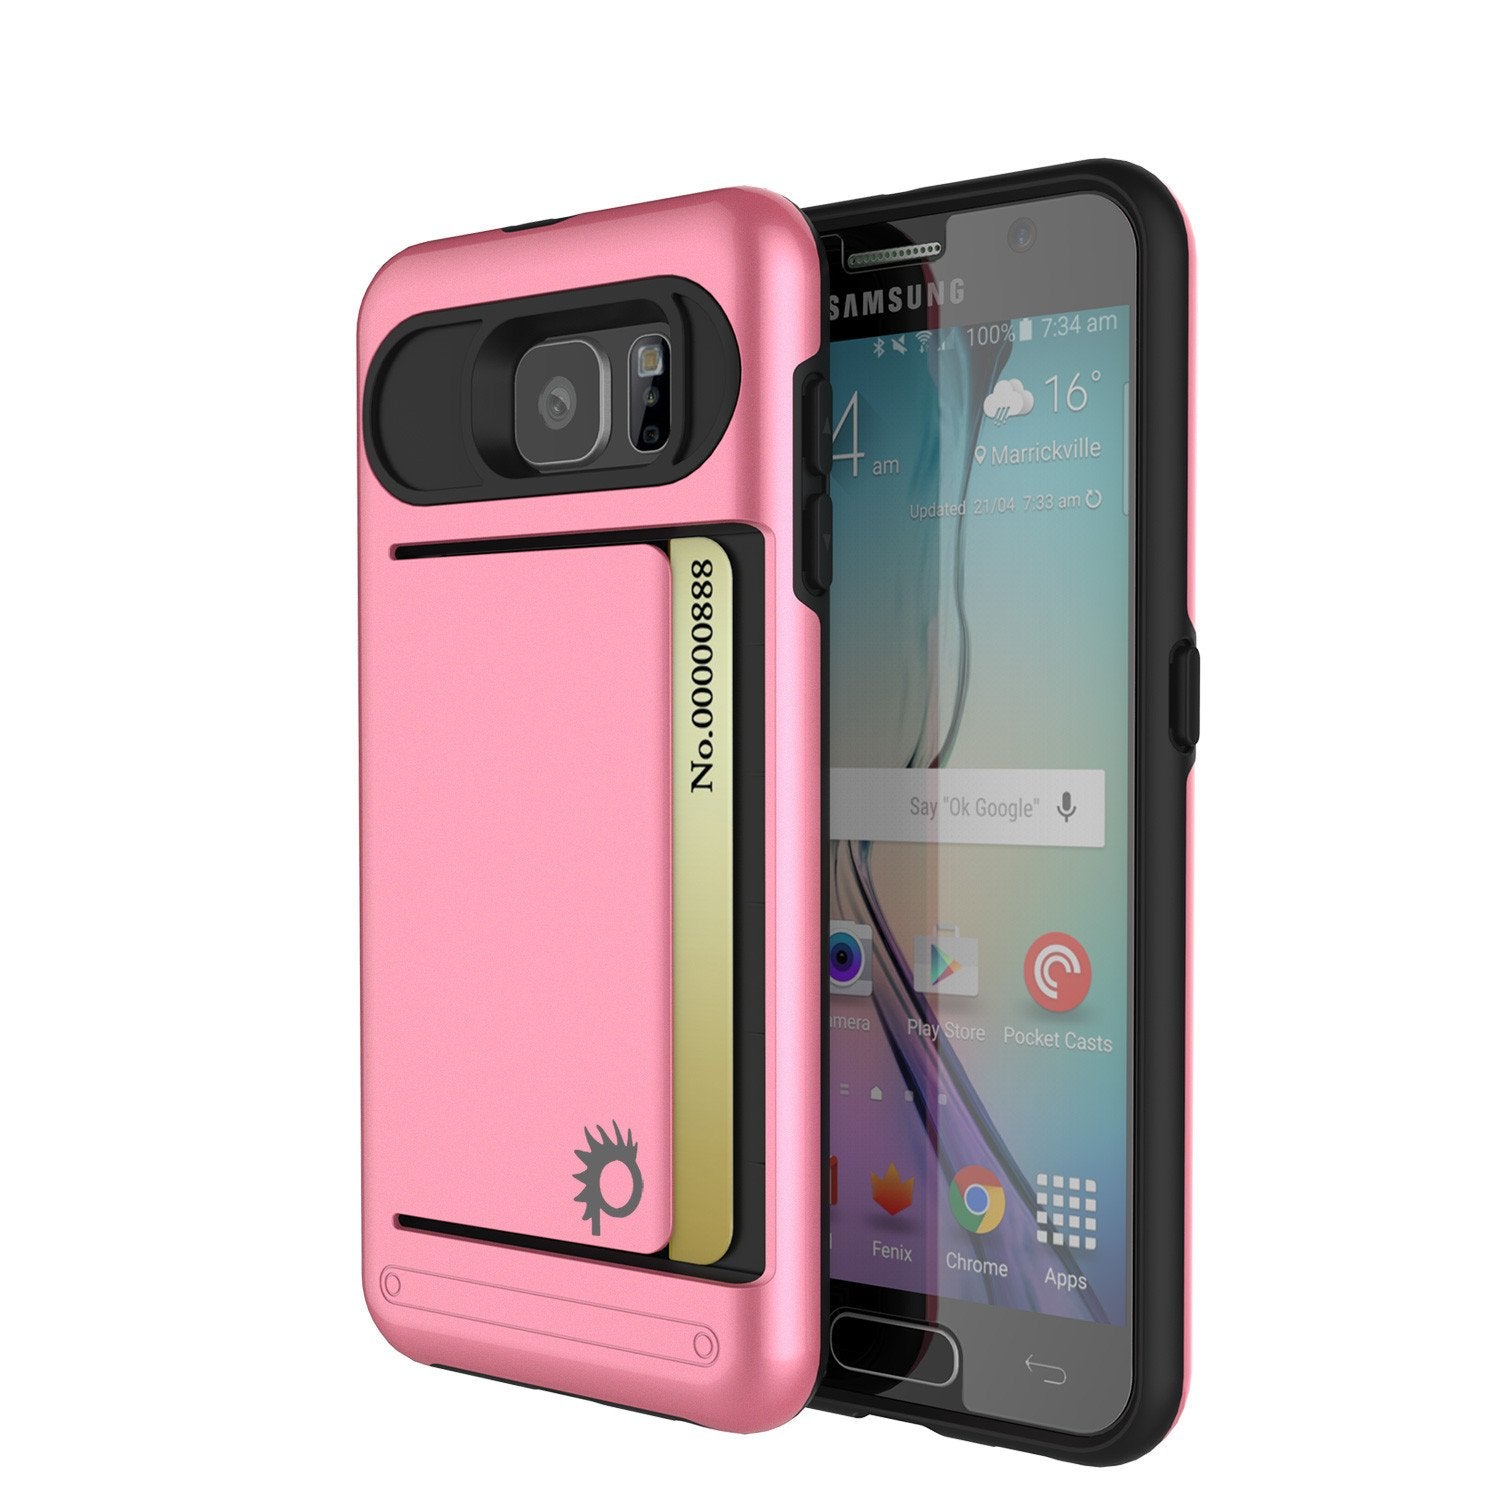 Galaxy s6 Case PunkCase CLUTCH Pink Series Slim Armor Soft Cover Case w/ Tempered Glass